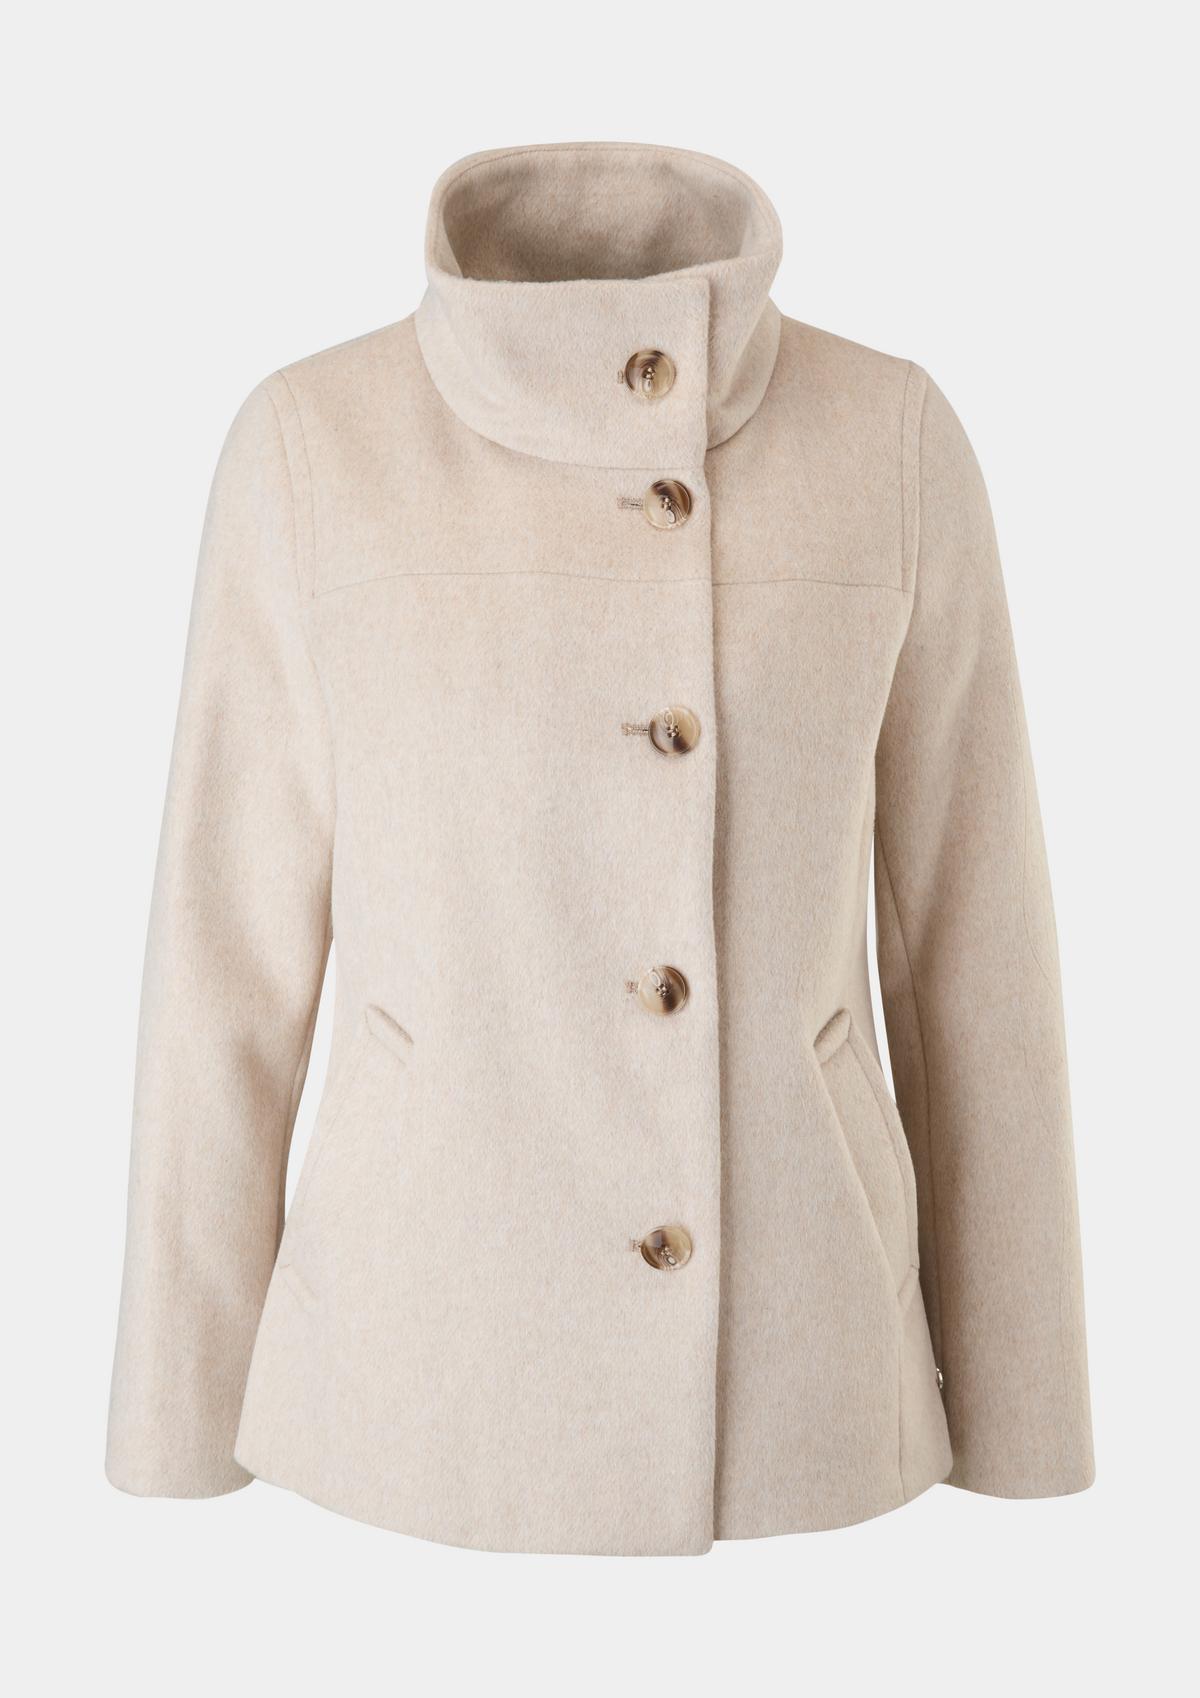 Wool coat with a - collar high navy